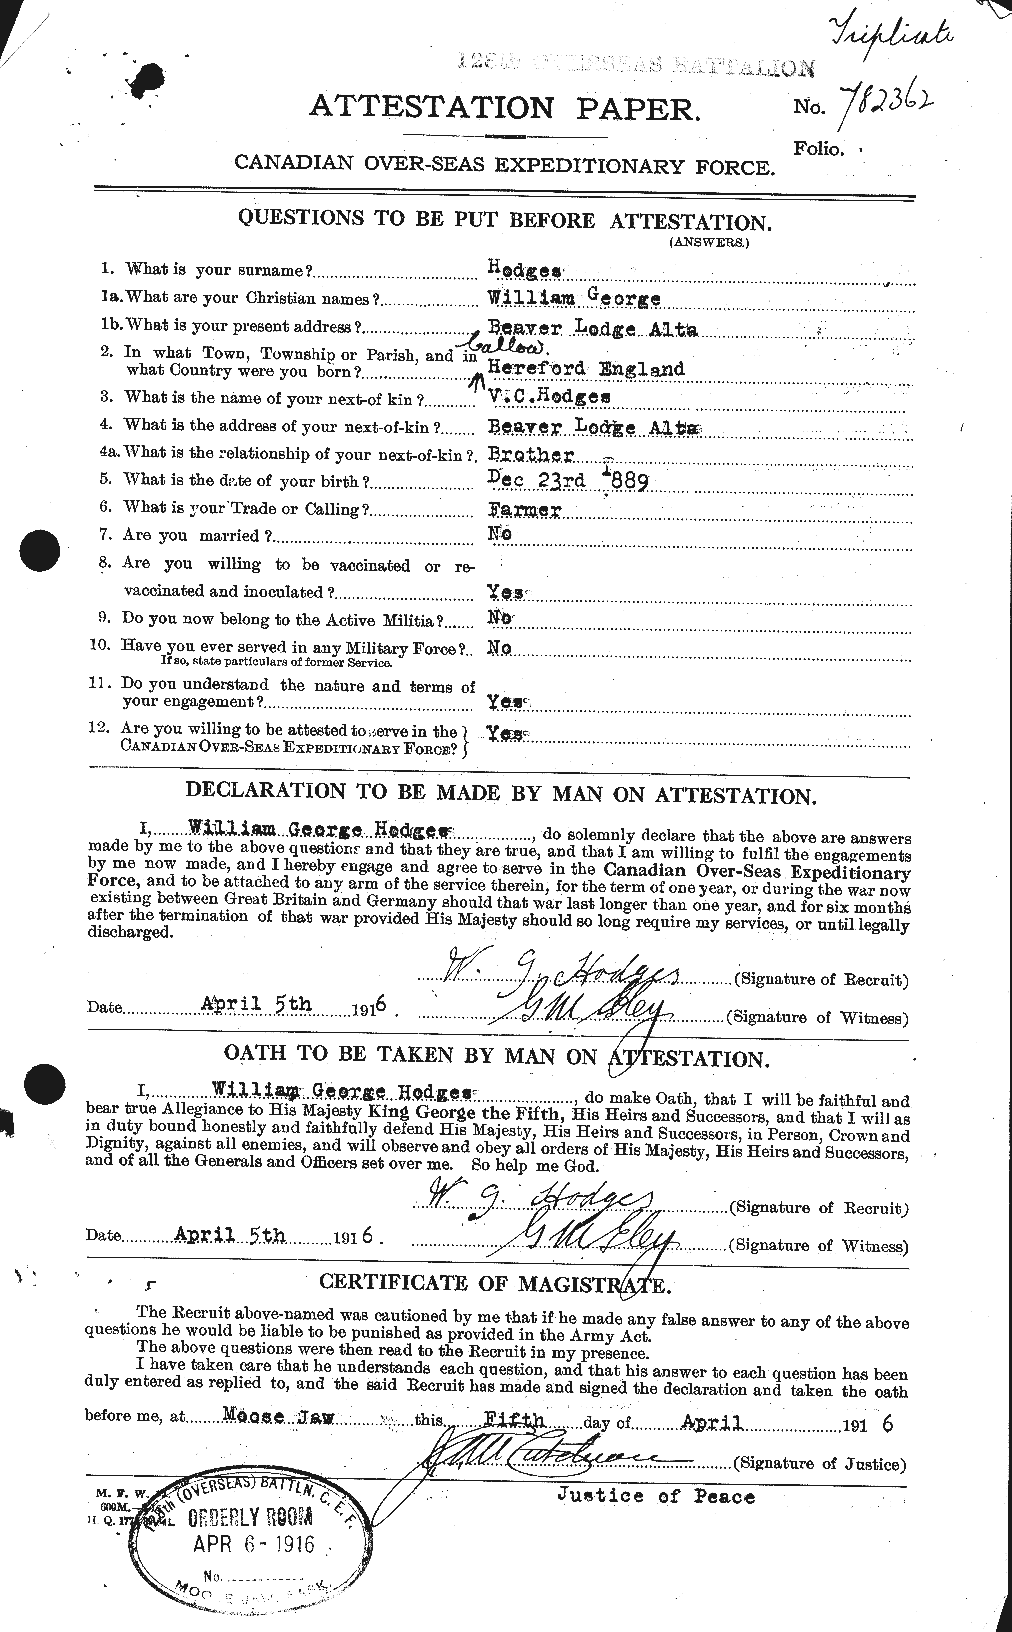 Personnel Records of the First World War - CEF 392722a